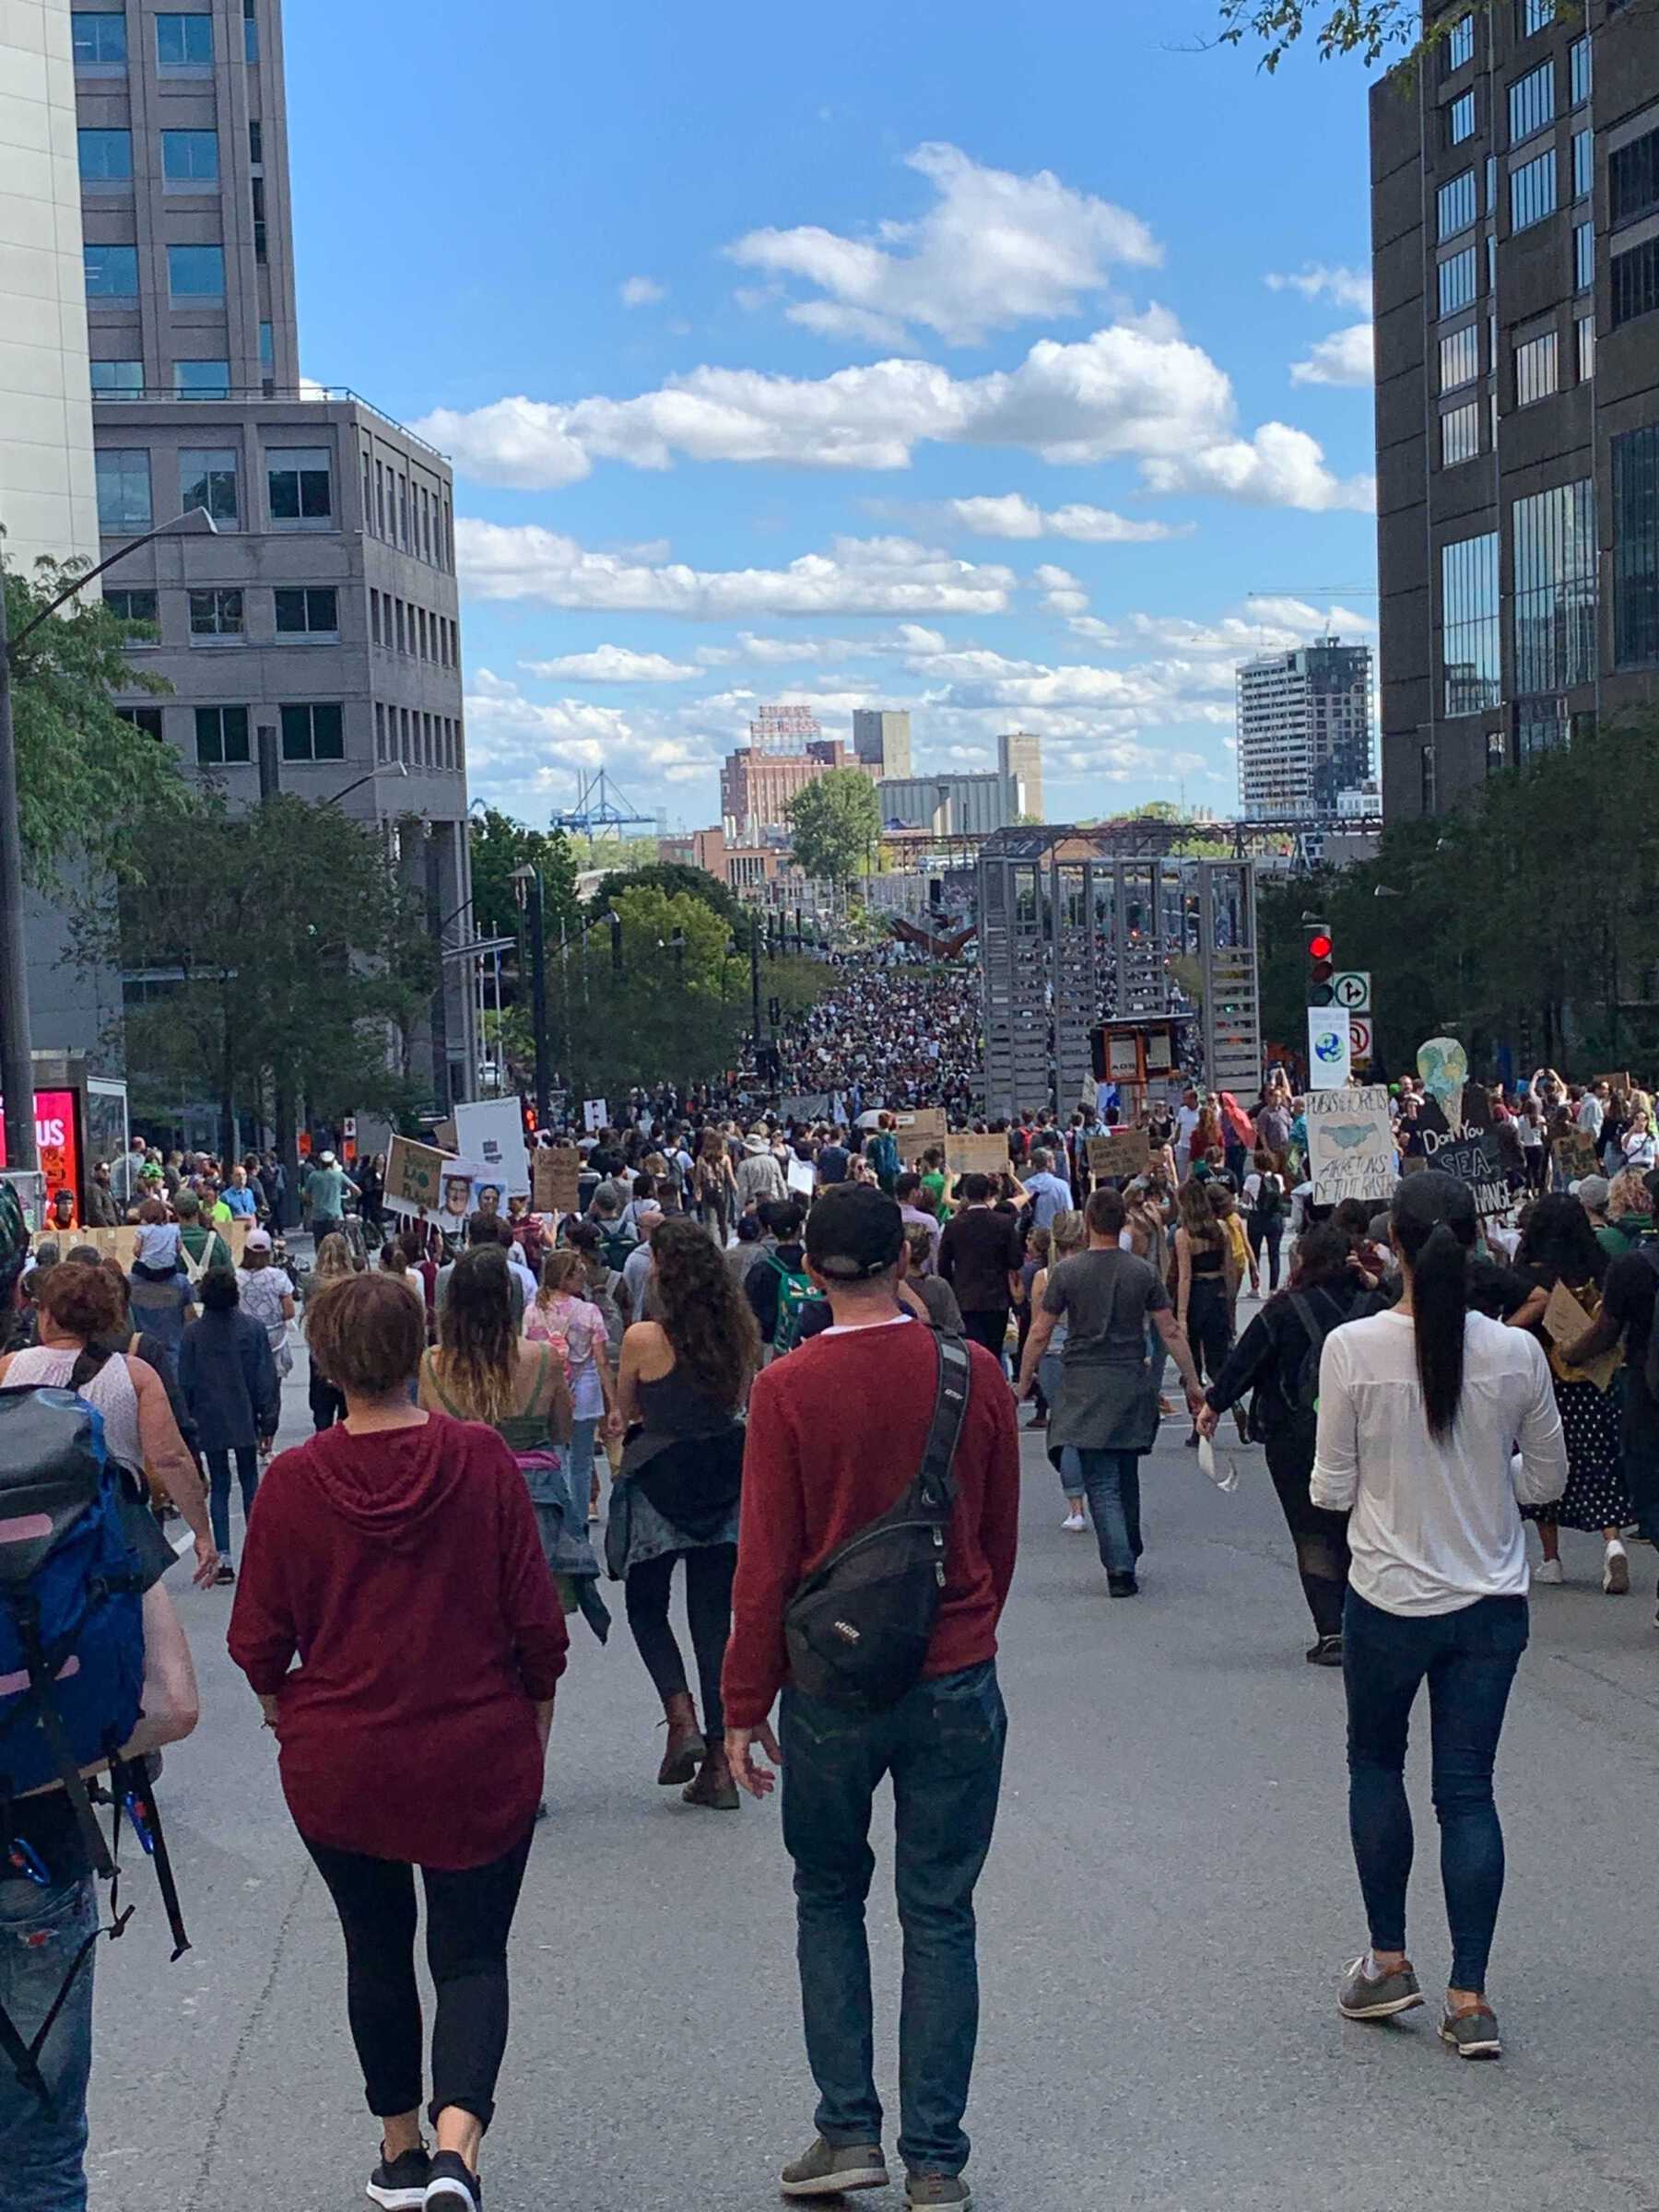 Thousands of people marching on city street